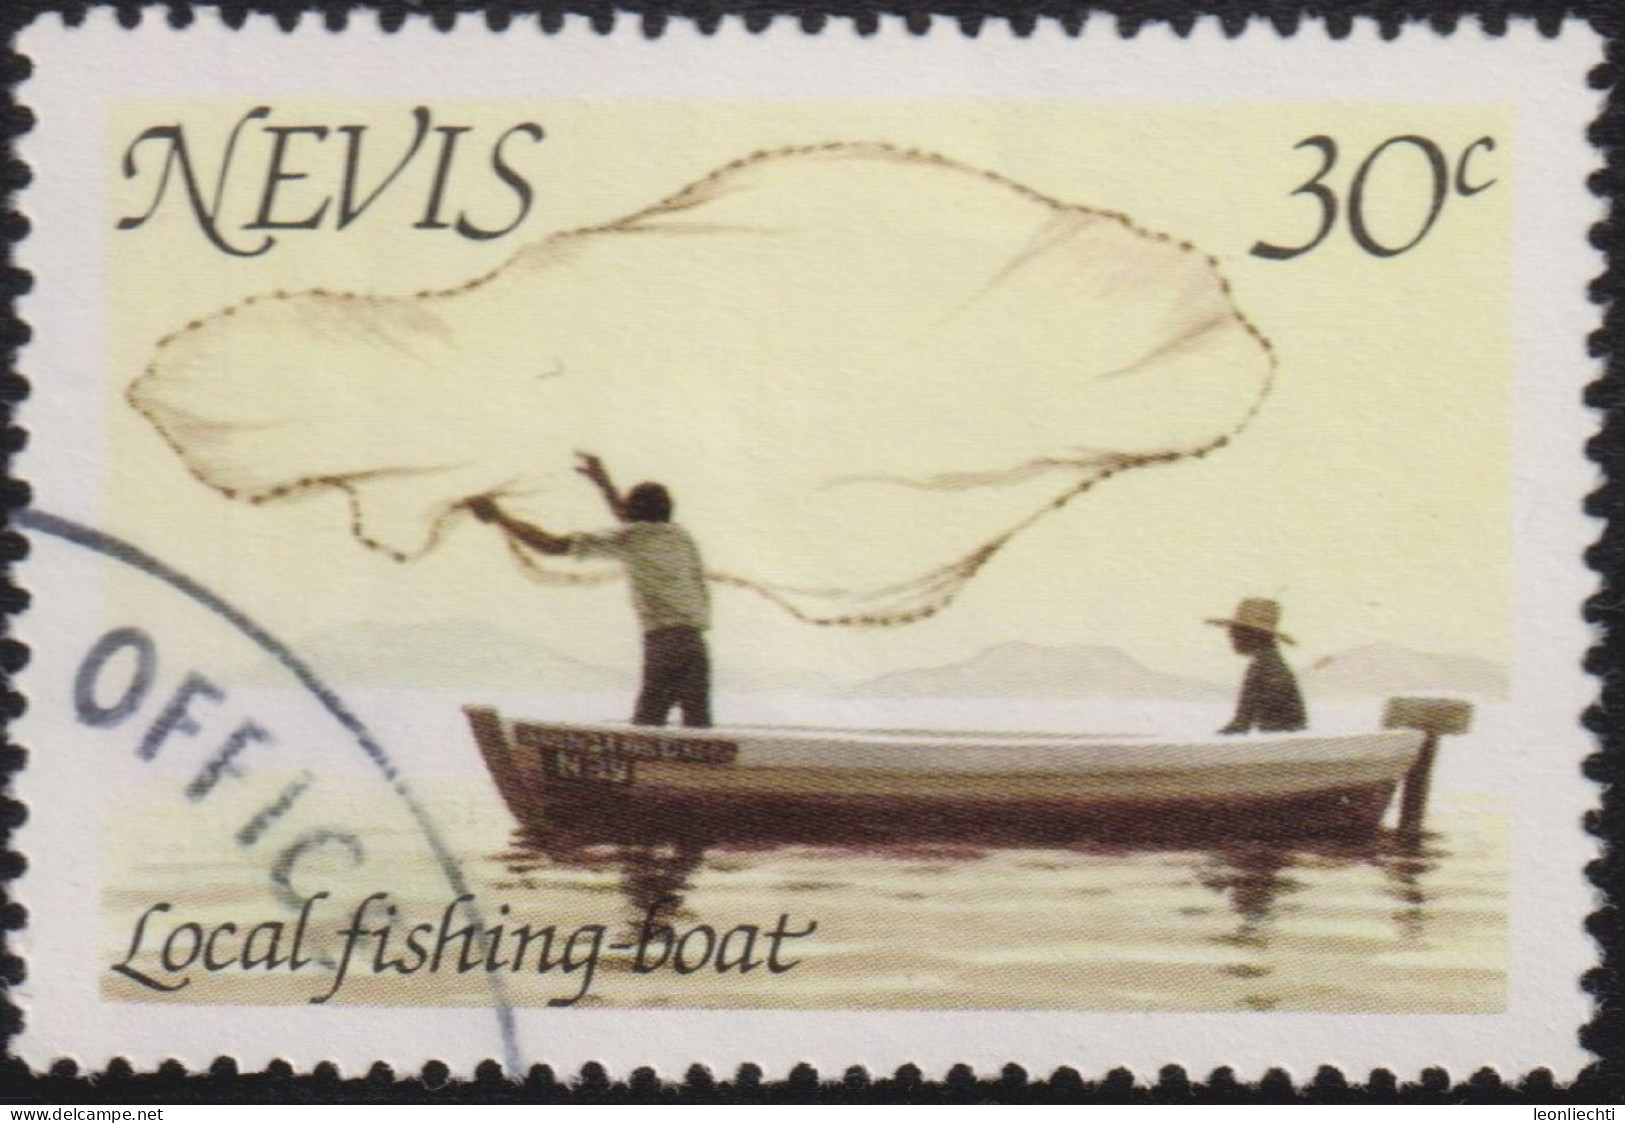 1980 St.Christopher-Nevis & Anguilla ° Mi:KN-N 40A, Sn:KN-N 115, Yt:KN-N 45, Sg:KN-N 52, Local Fishing Boat - St.Christopher-Nevis & Anguilla (...-1980)